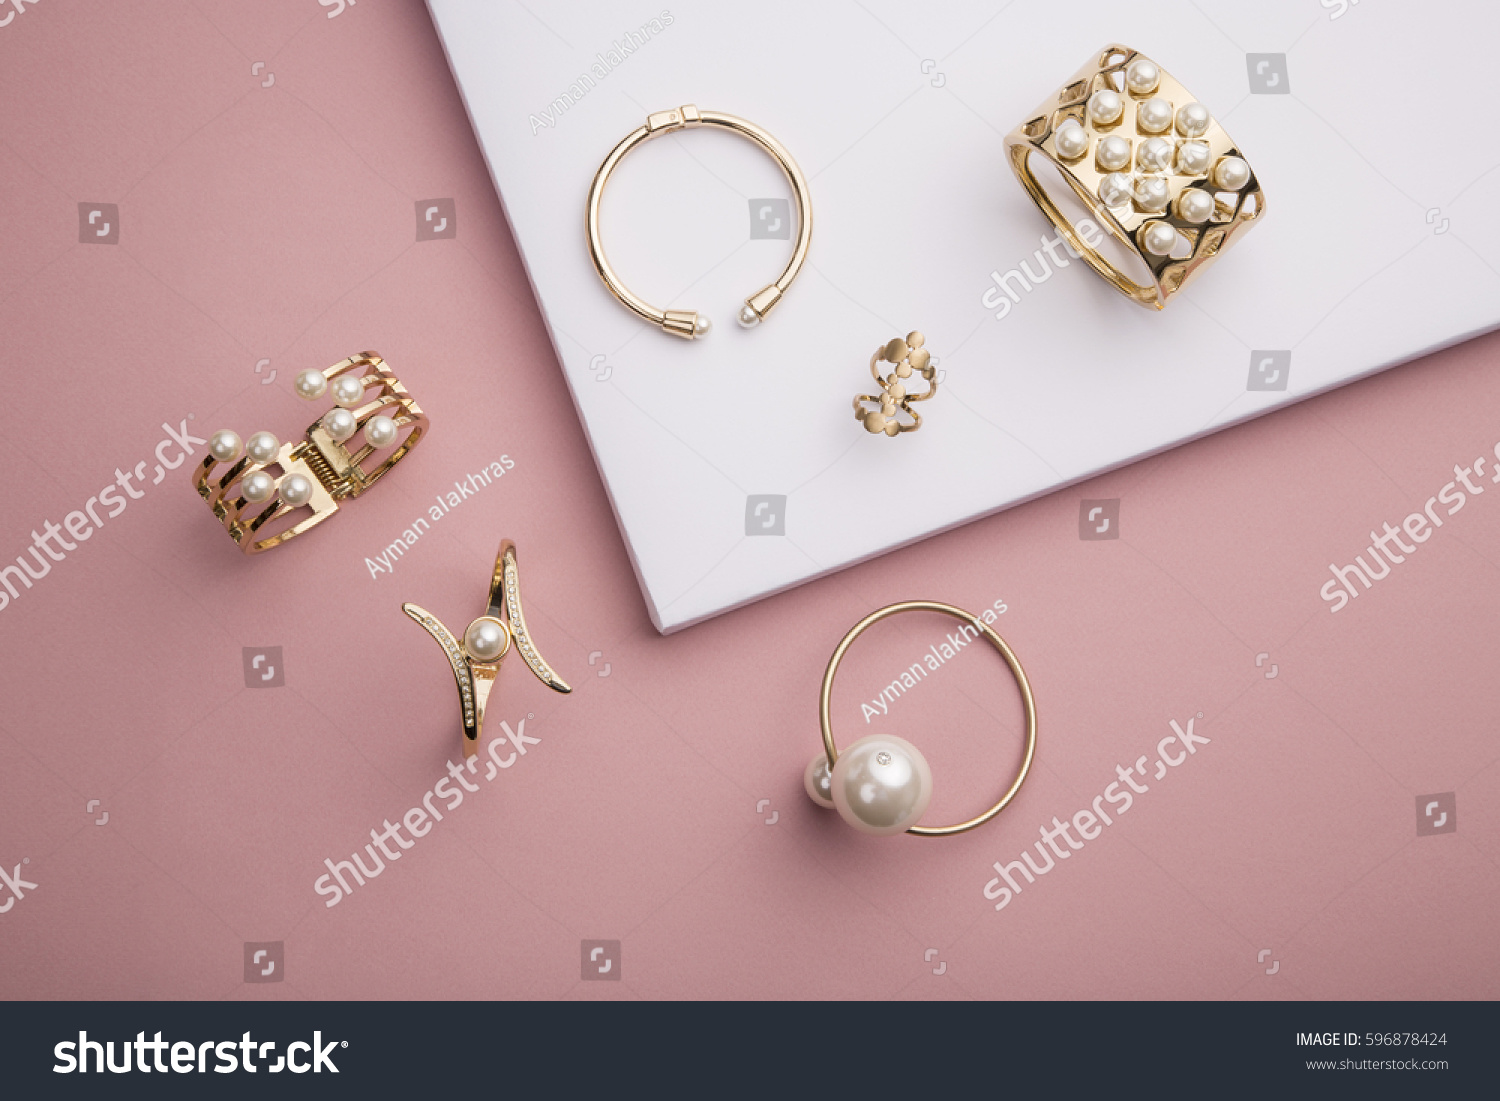 Pearl Golden Bracelets and ring on pink background - Pearl Bracelets on paper background setup  #596878424